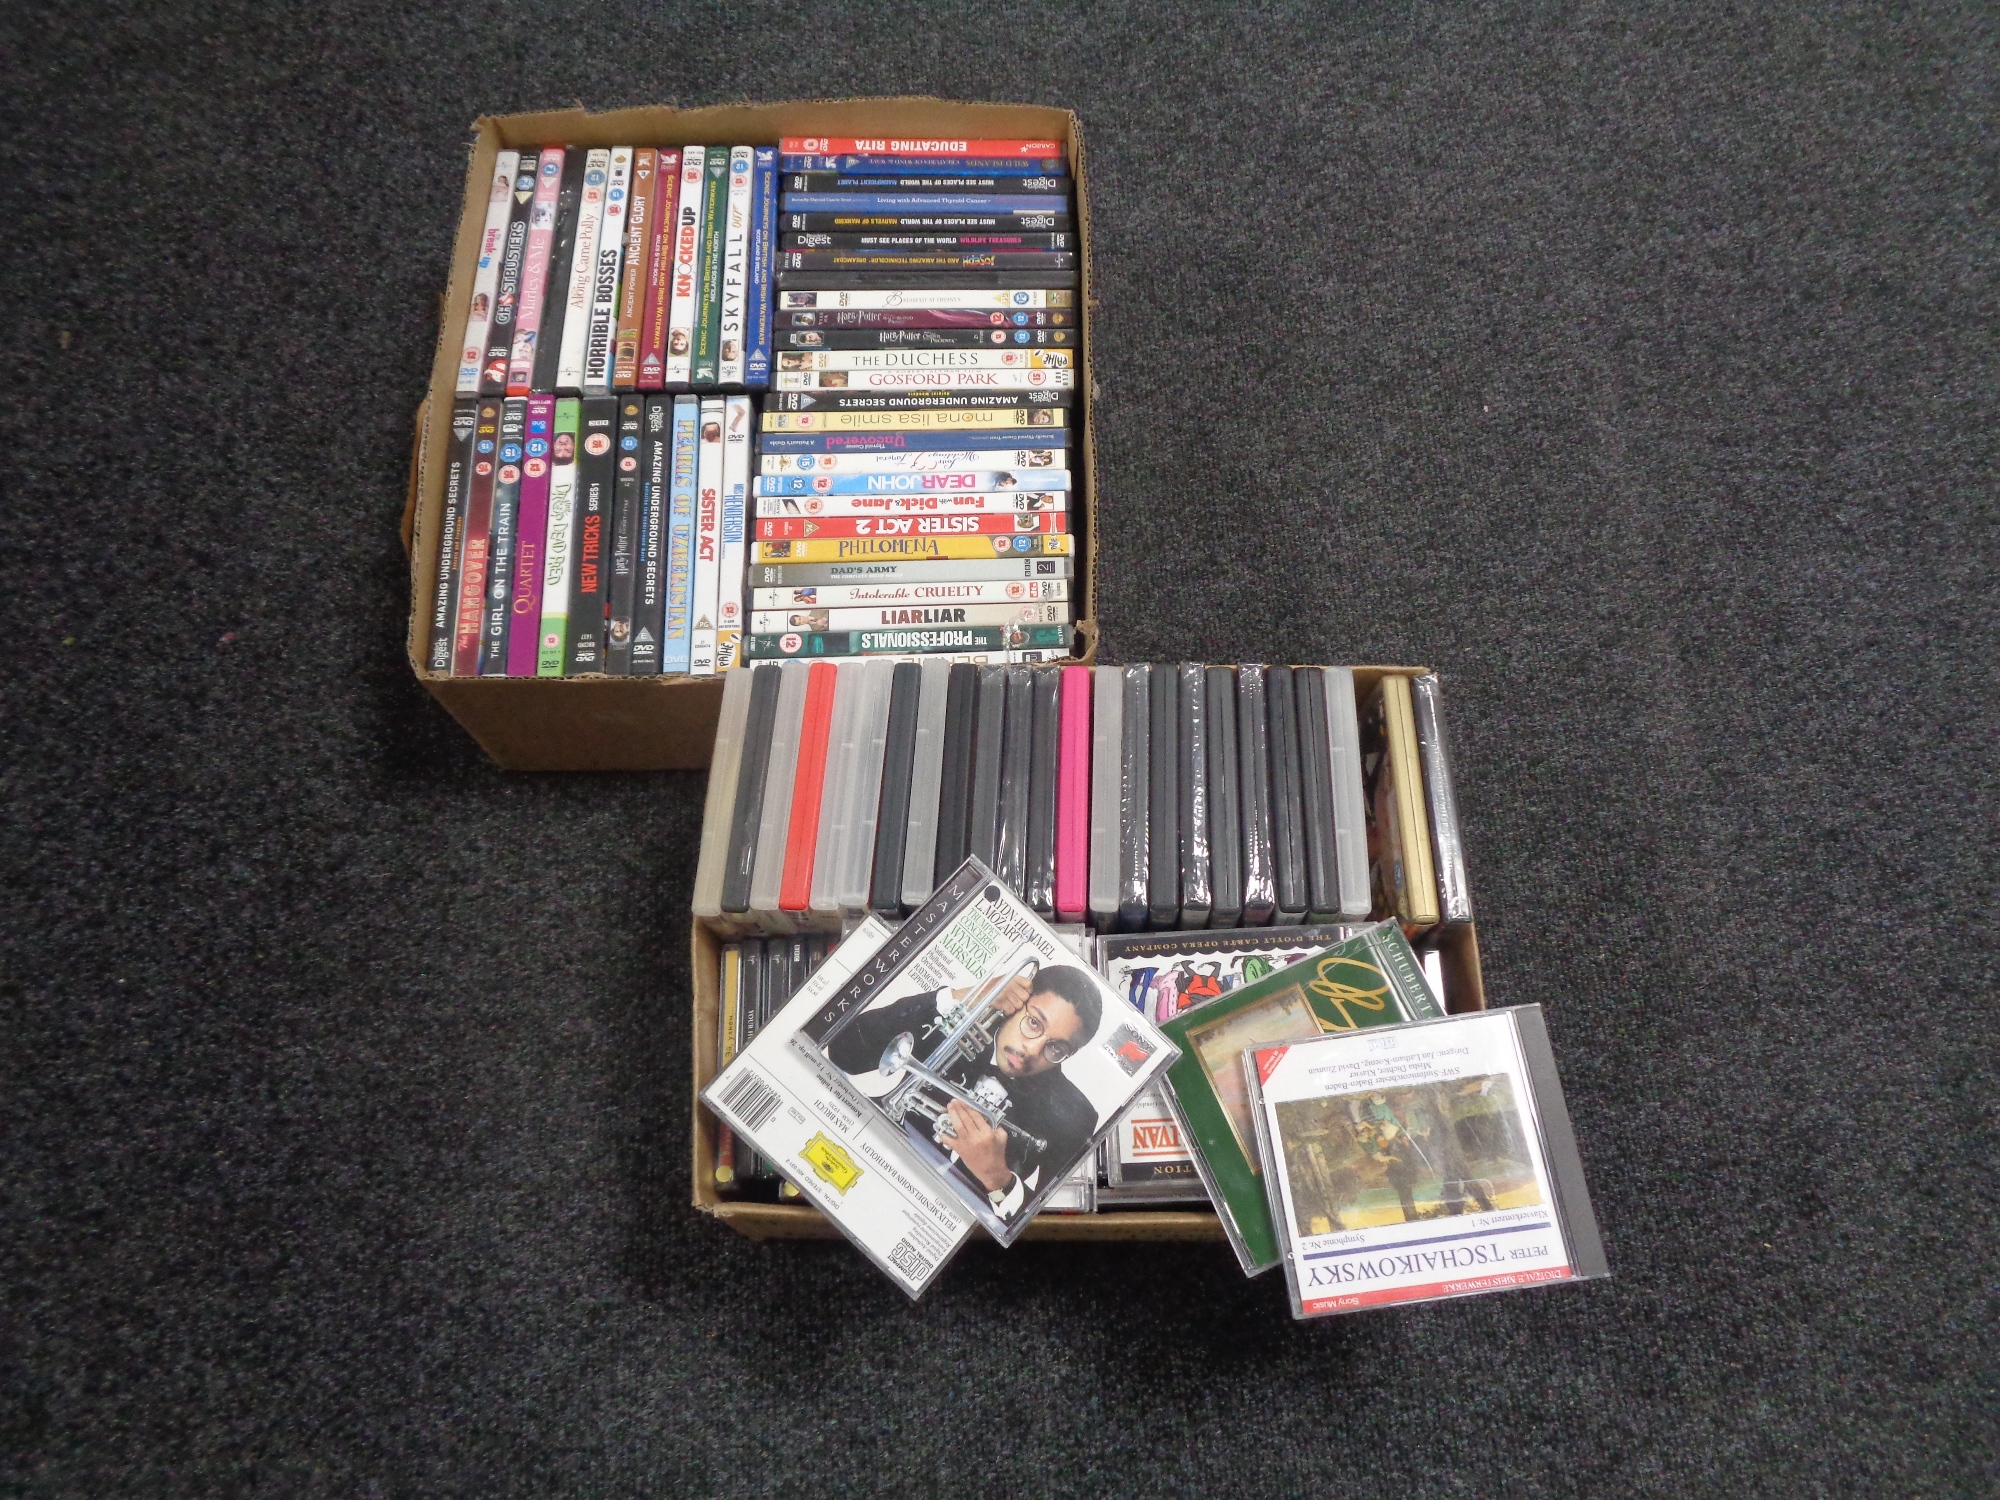 Two boxes of DVD's and CD's